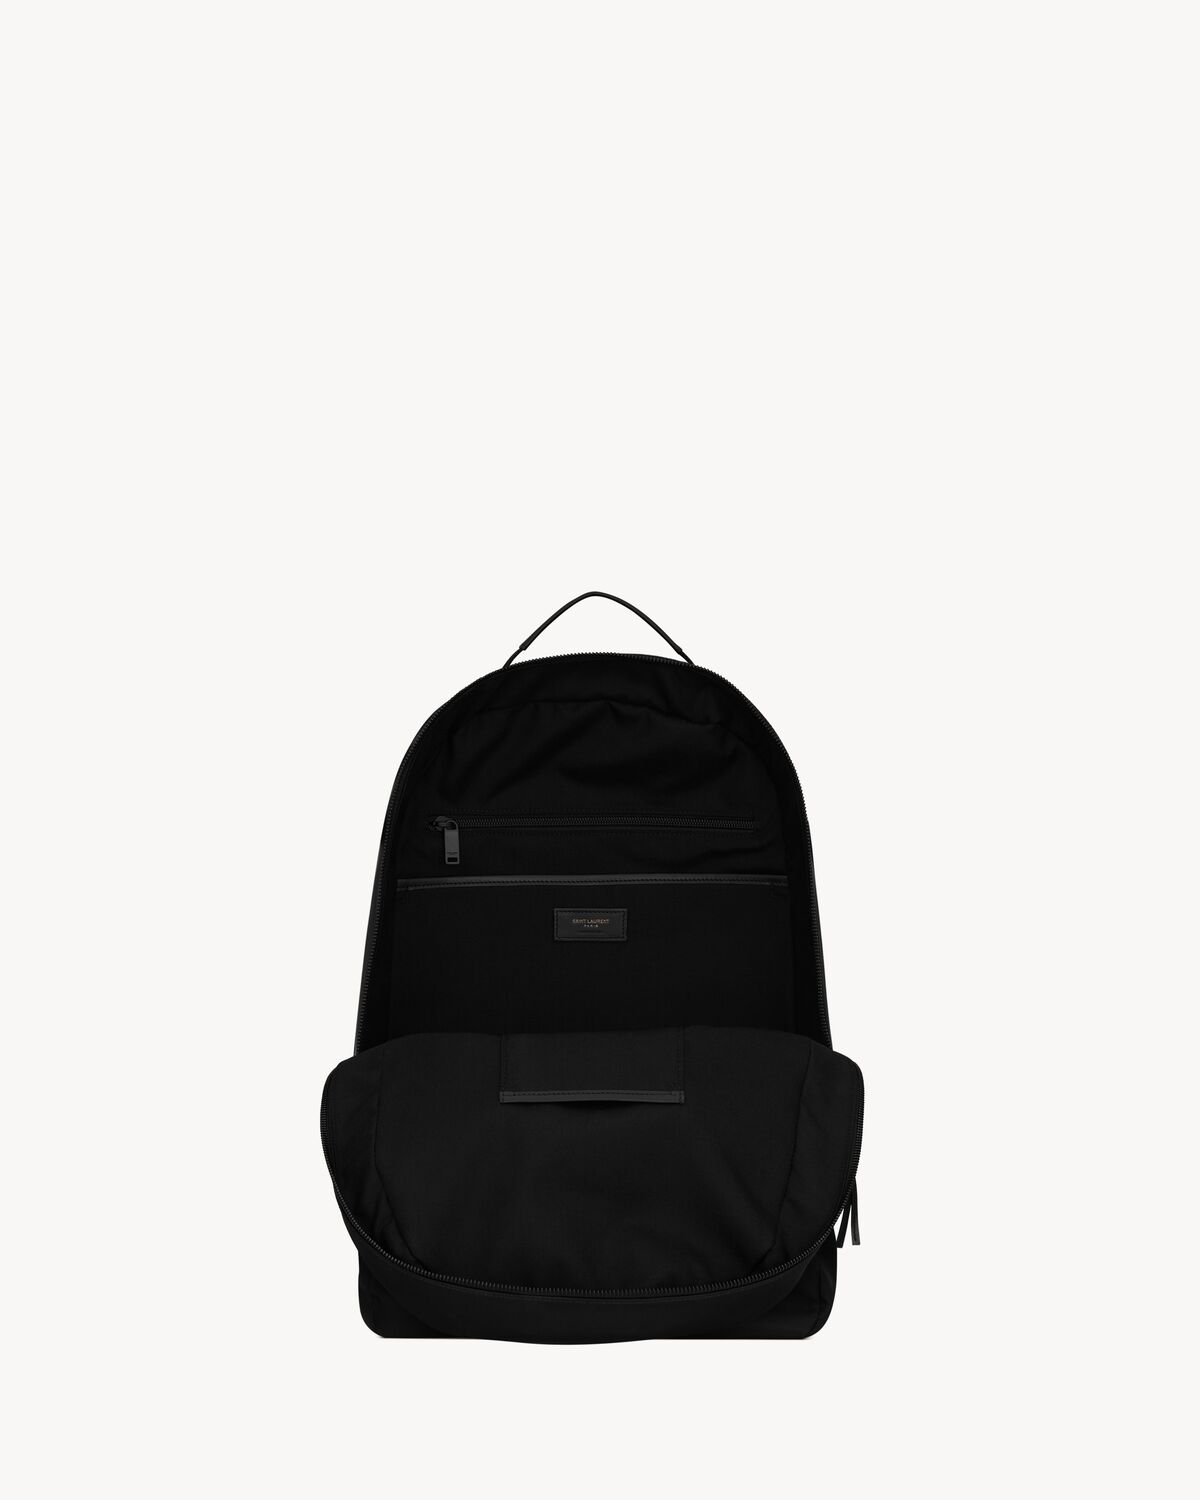 City trekking backpack in ECONYL®, smooth leather and nylon